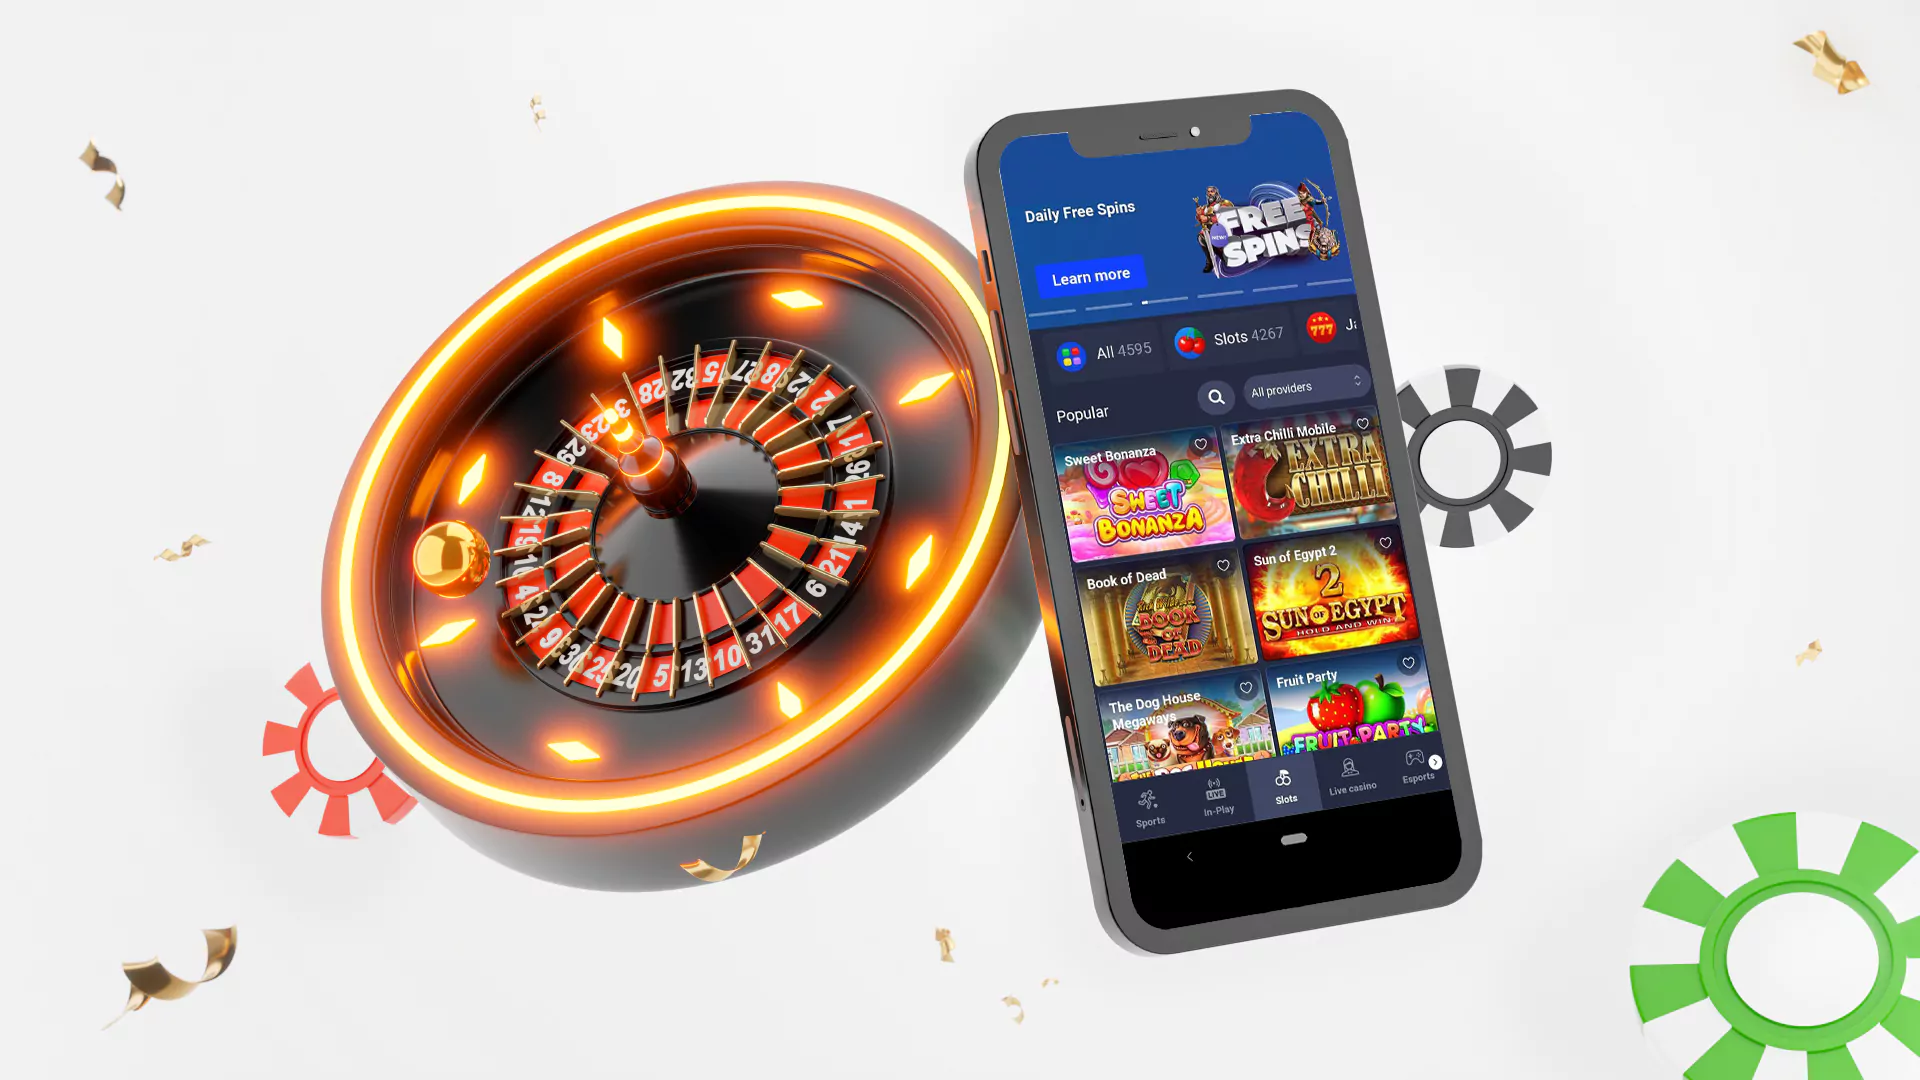 Those users who like casino games can enjoy them in the special section.